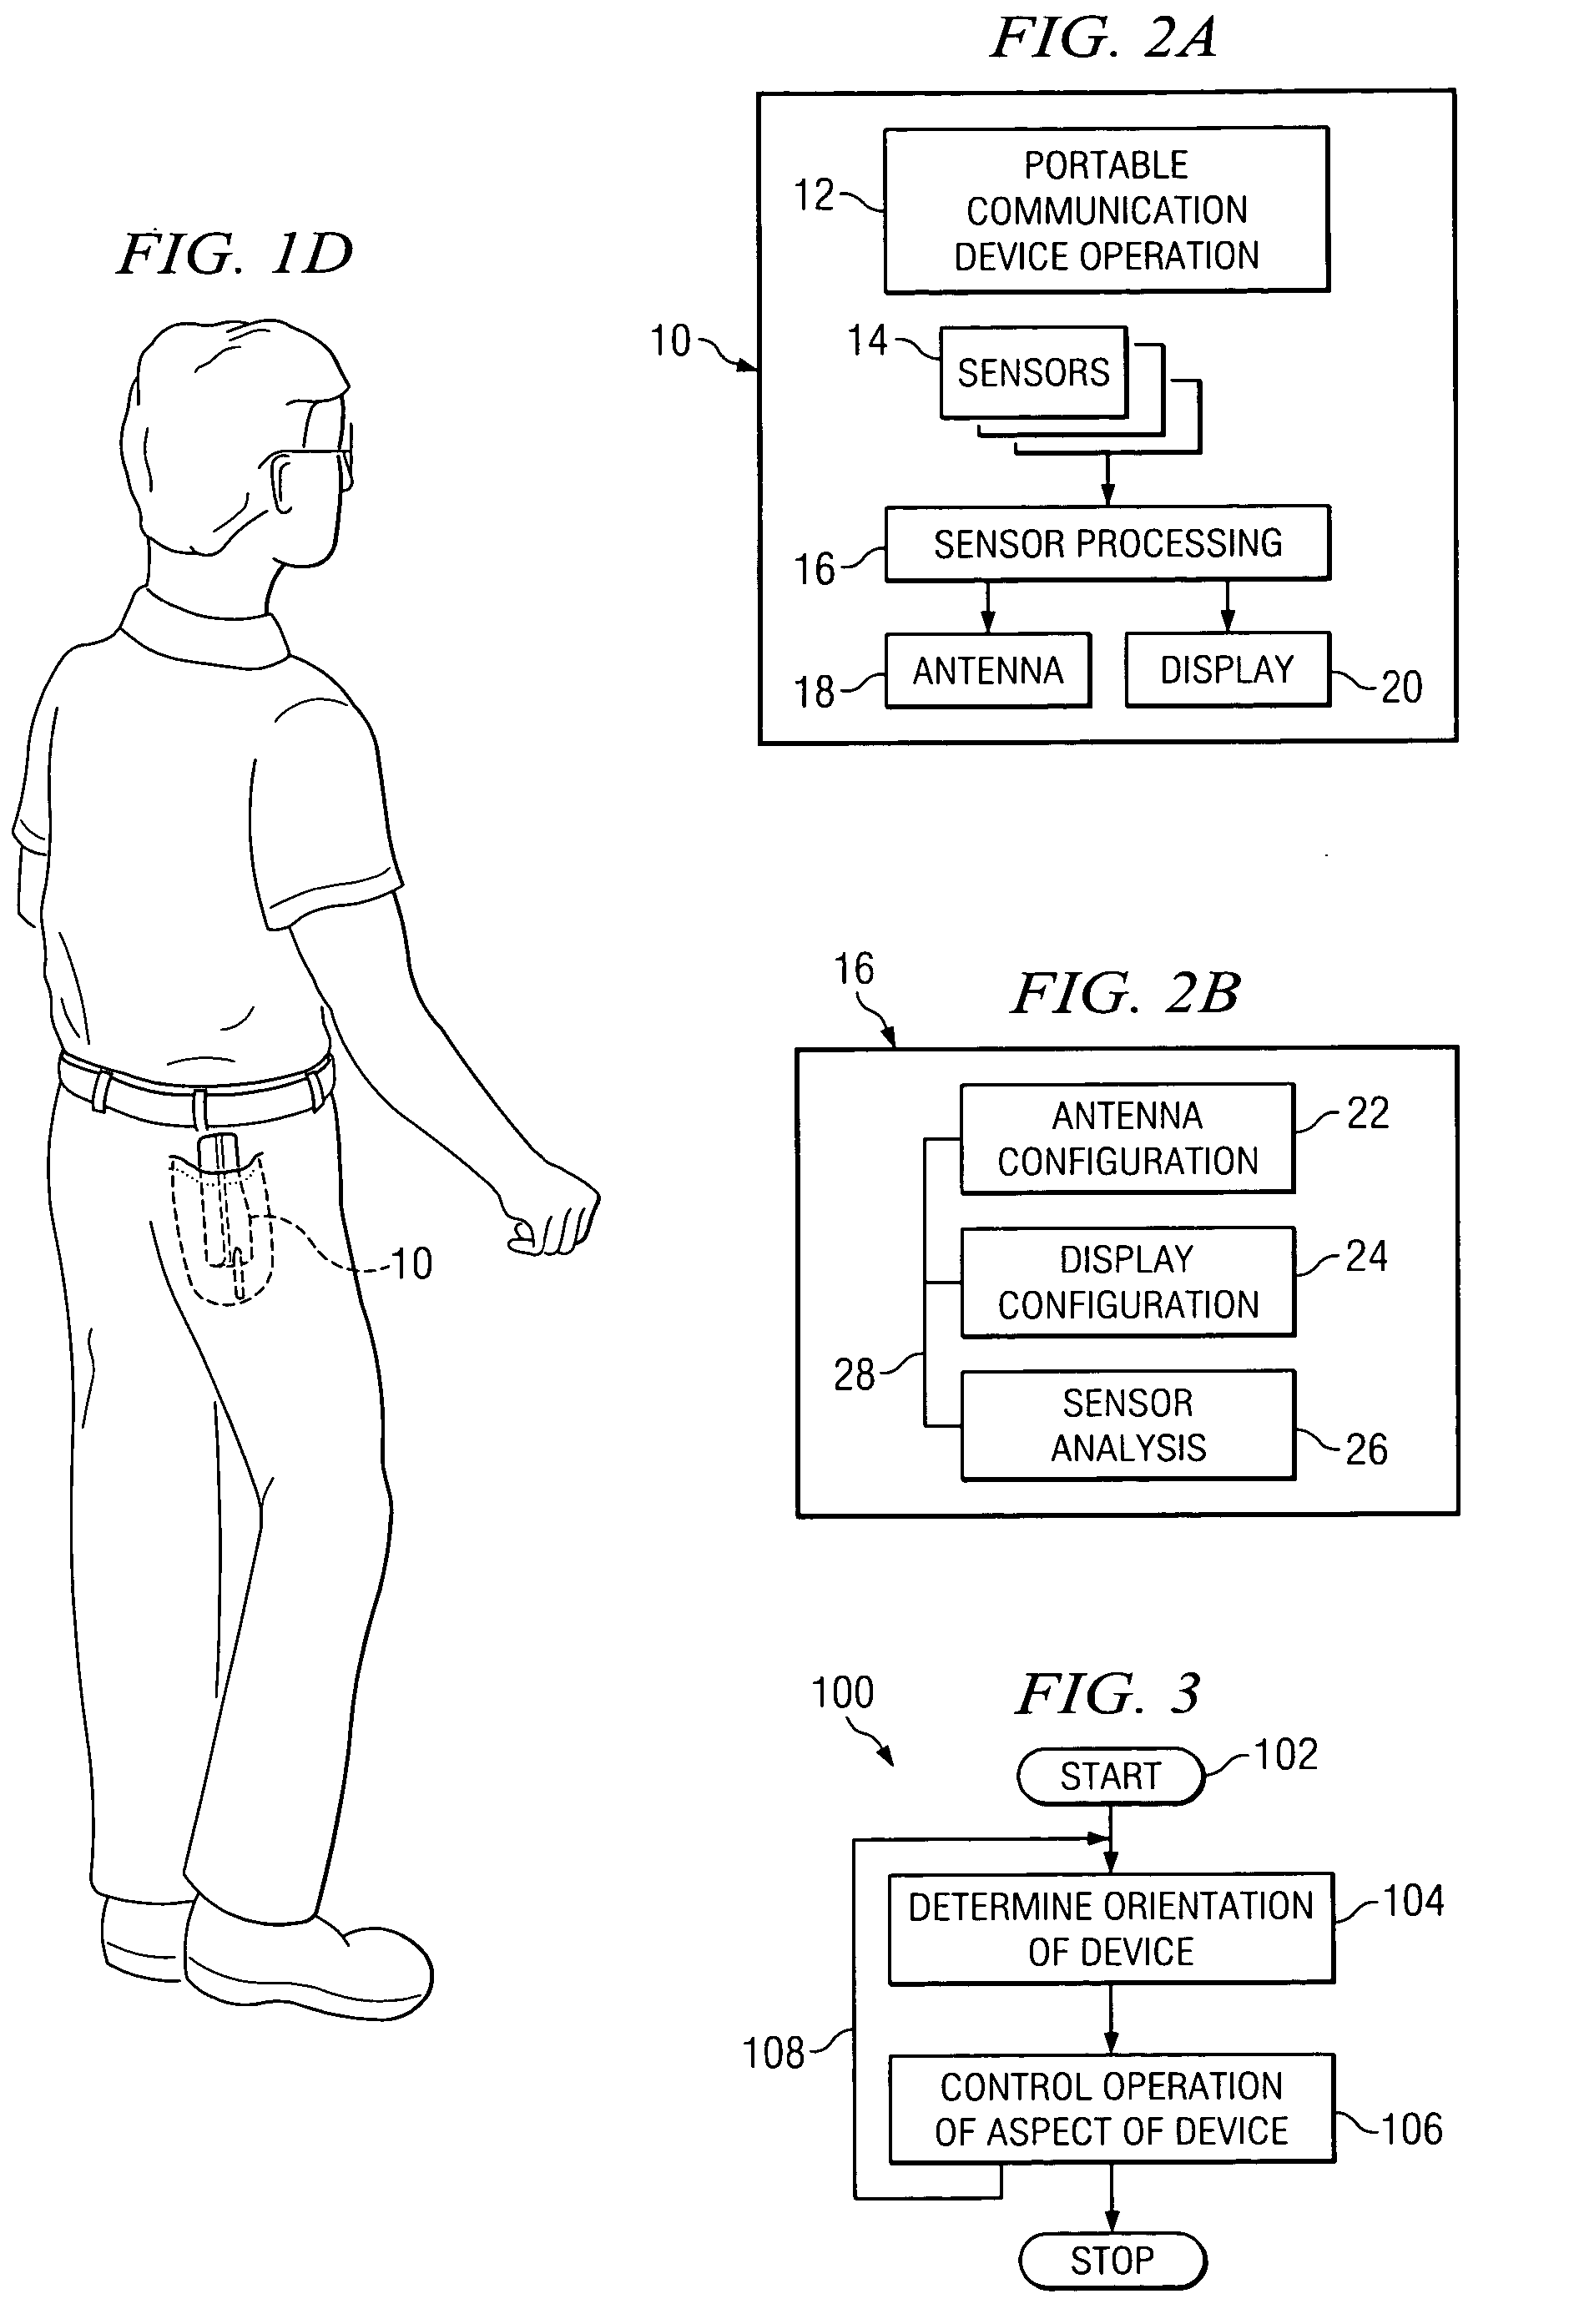 Method and system for controlling a portable communication device based on its orientation